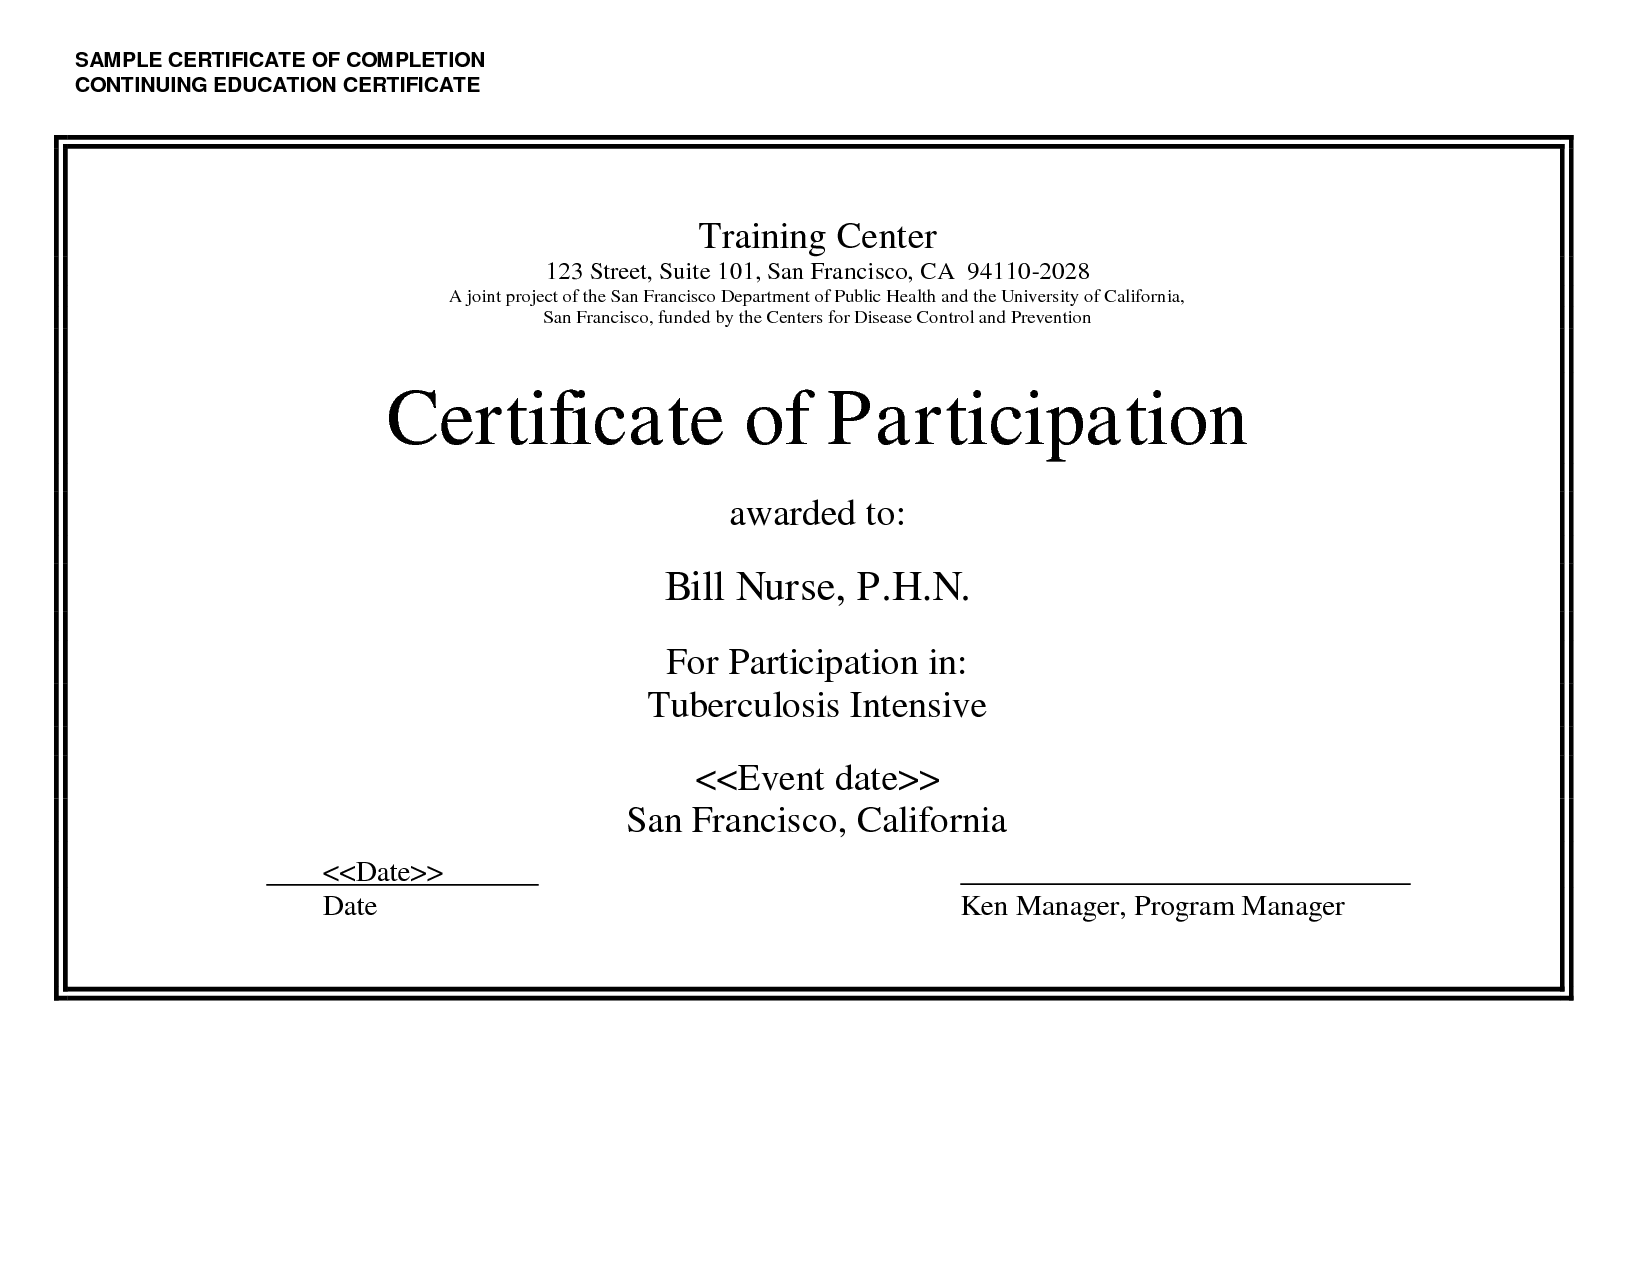 Continuing Education Certificate Template Best Templates Ideas